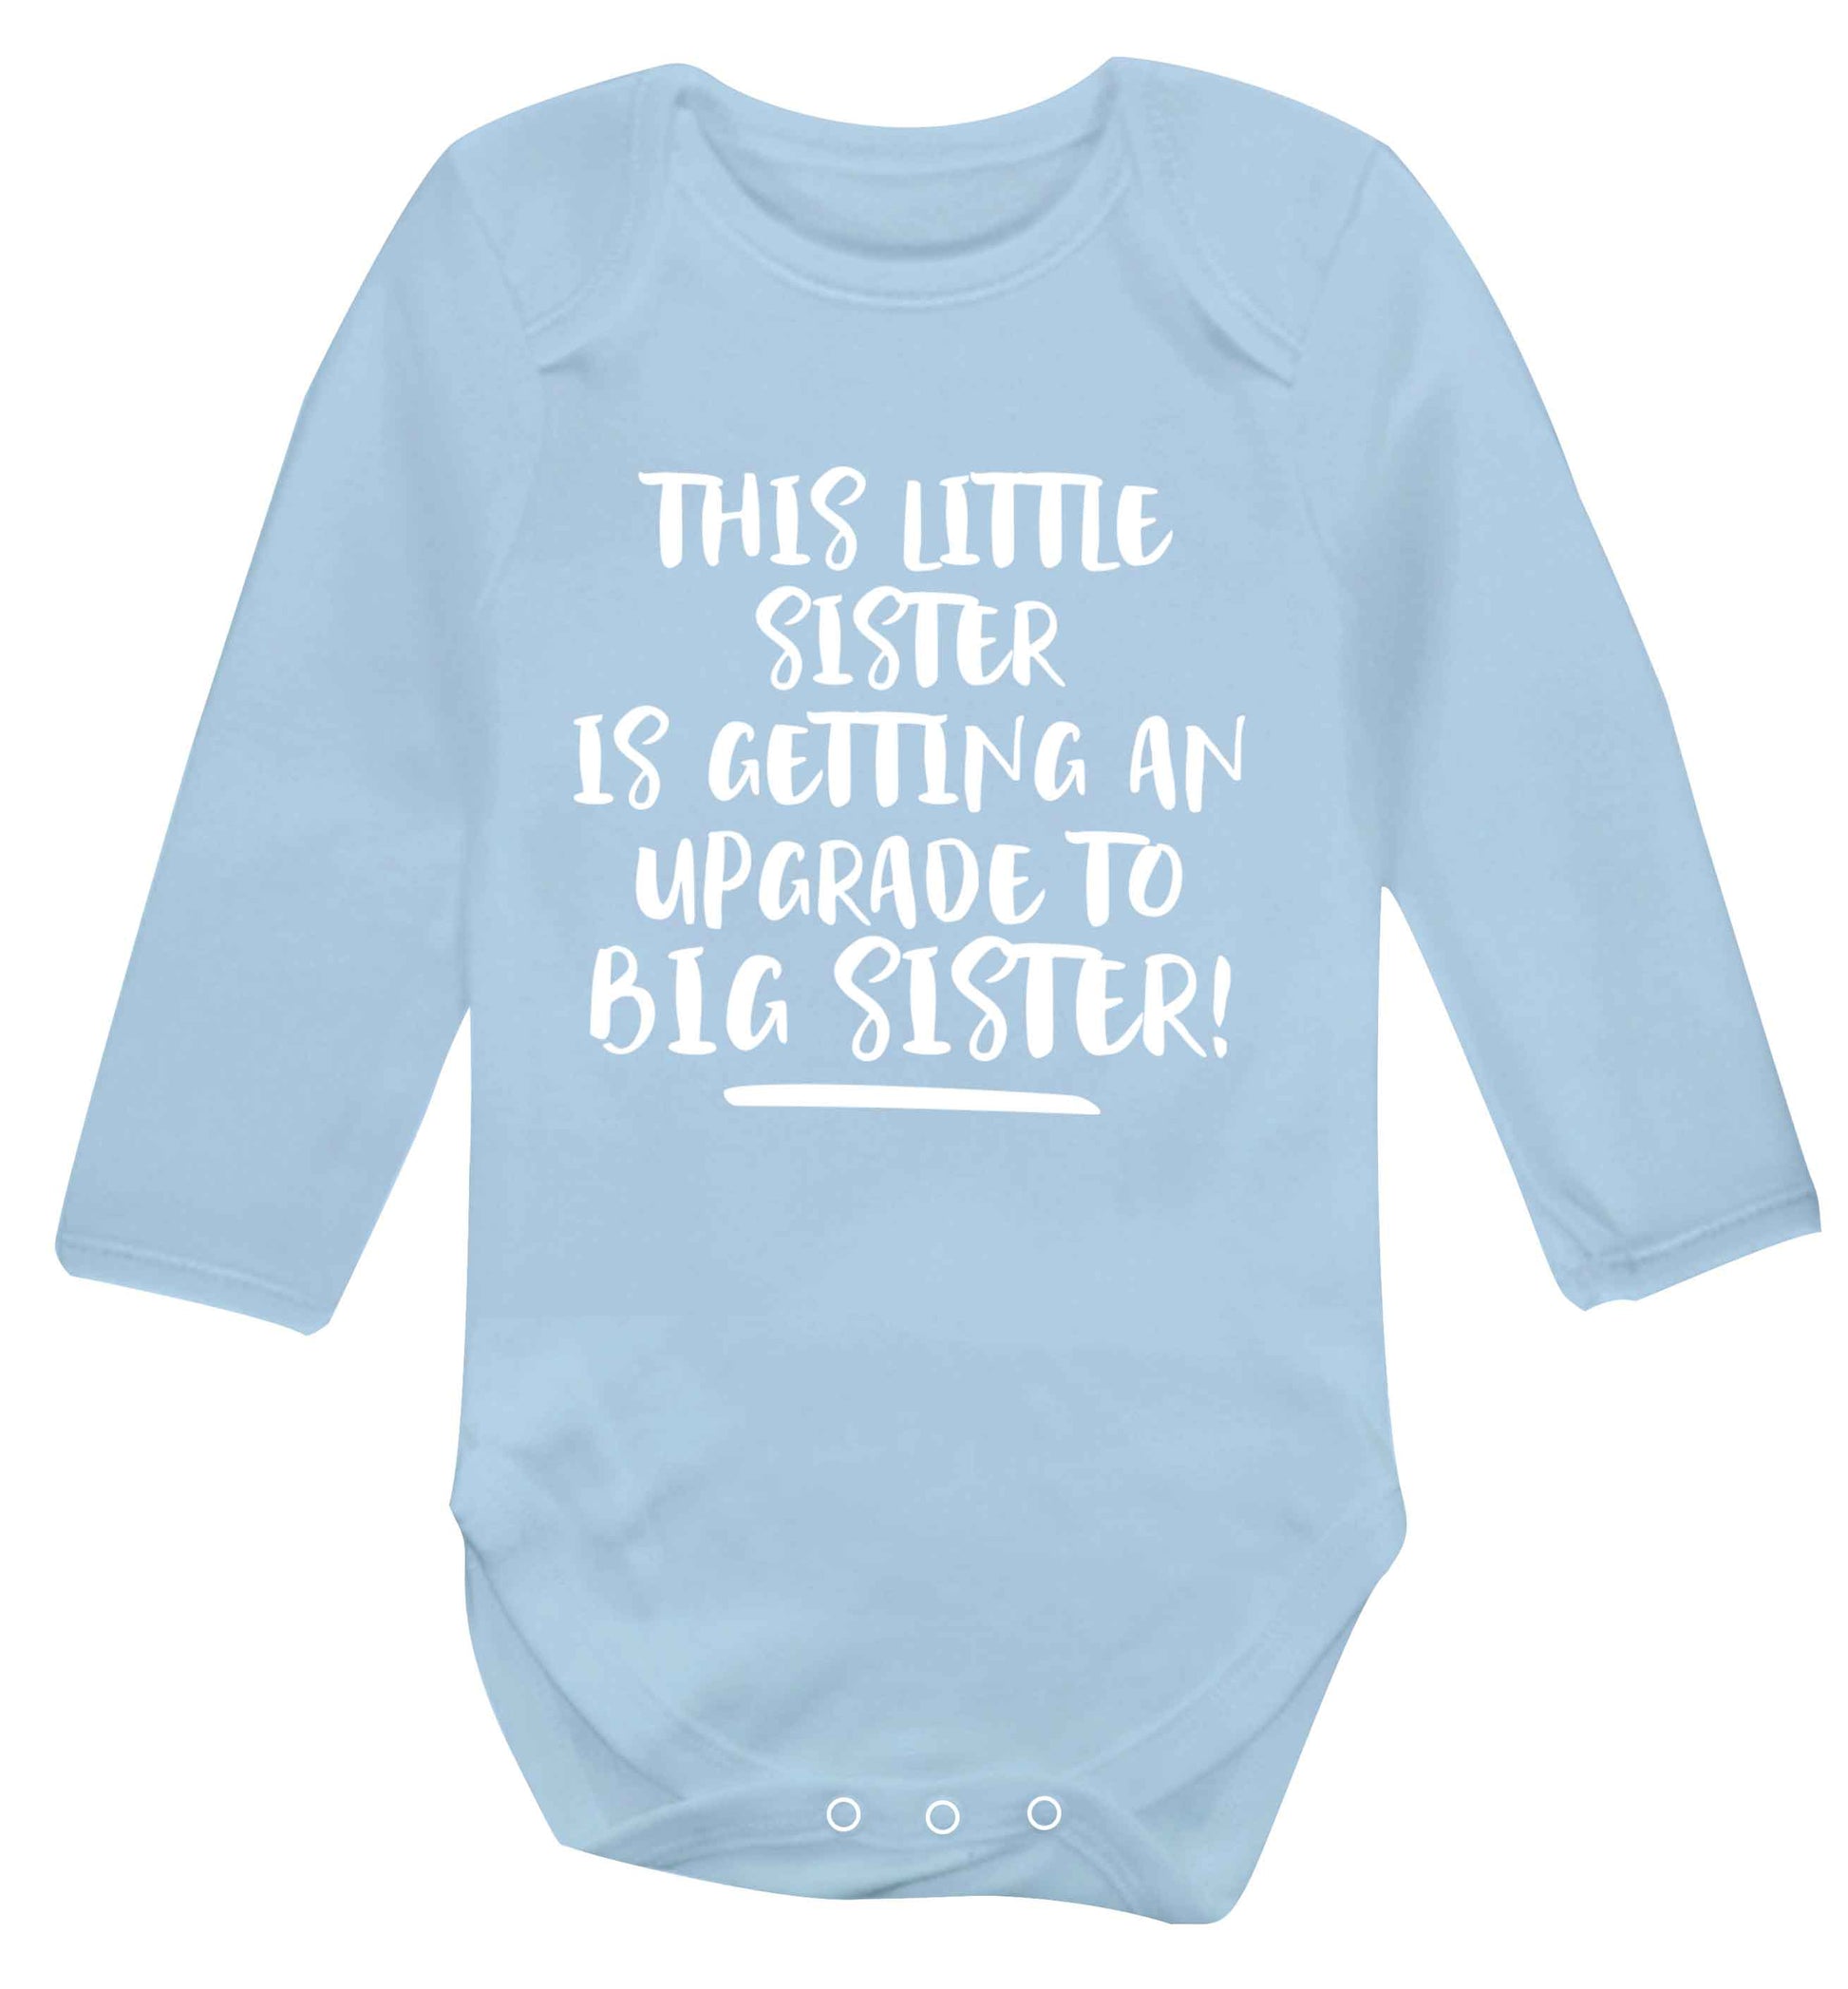 This little sister is getting an upgrade to big sister! Baby Vest long sleeved pale blue 6-12 months